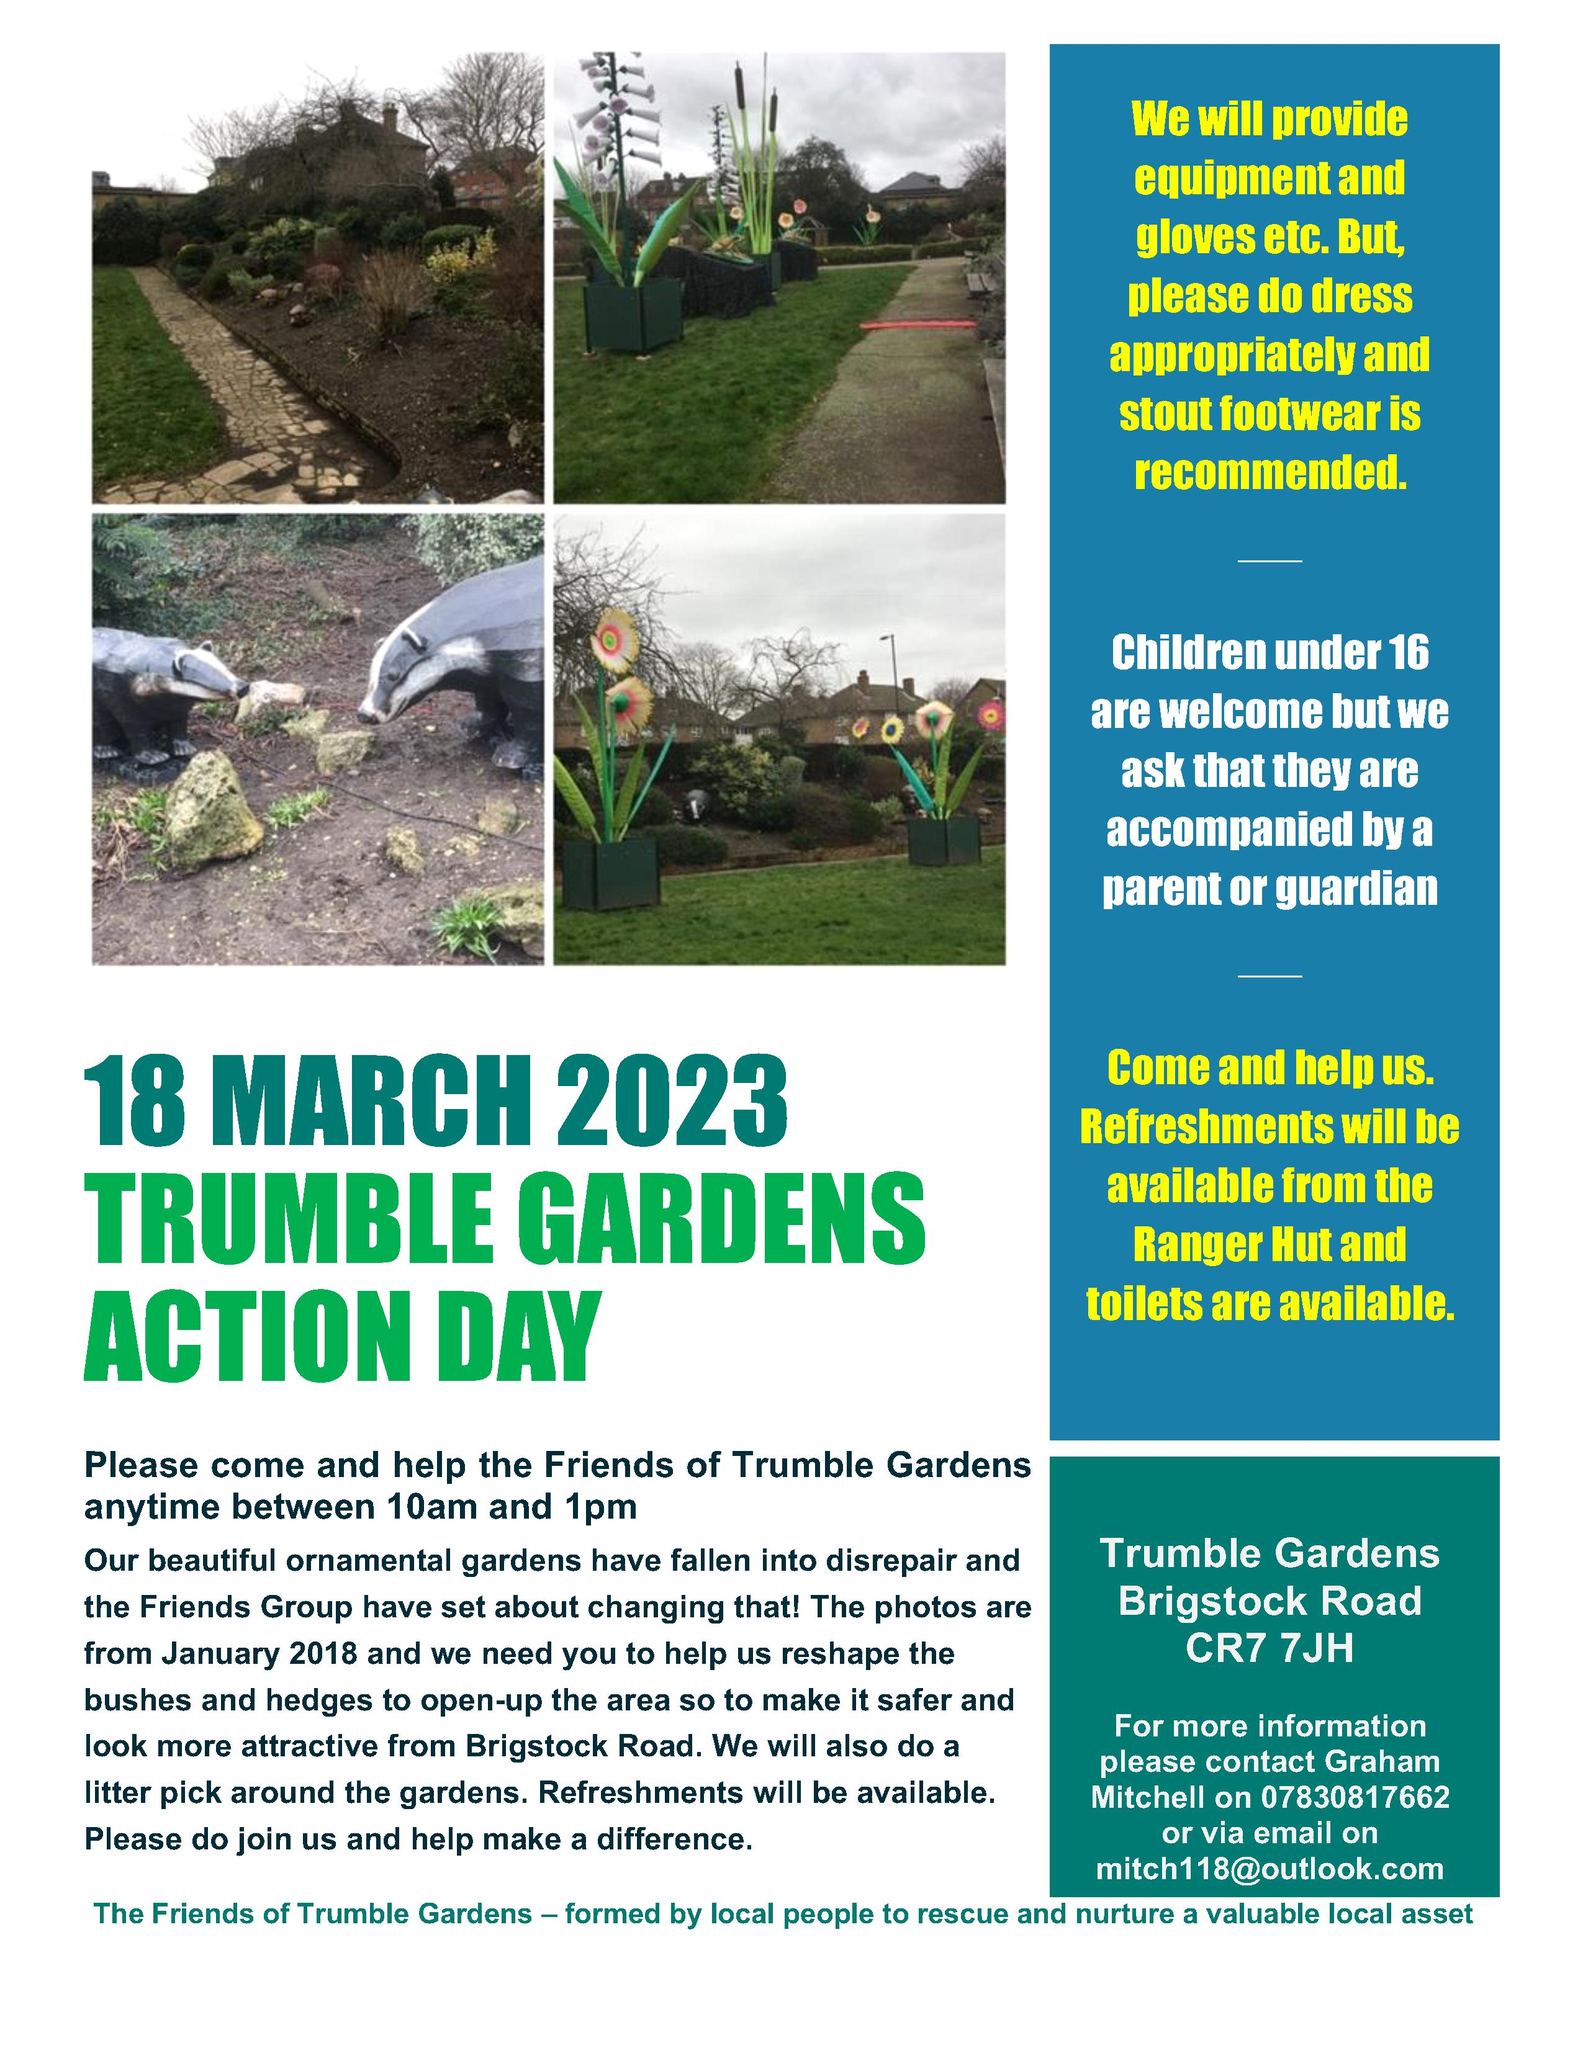 trumble gardens in thornton heath's action day poster. 4 images of trumble gardens and infoormatioon such as the date: 18th march 2023